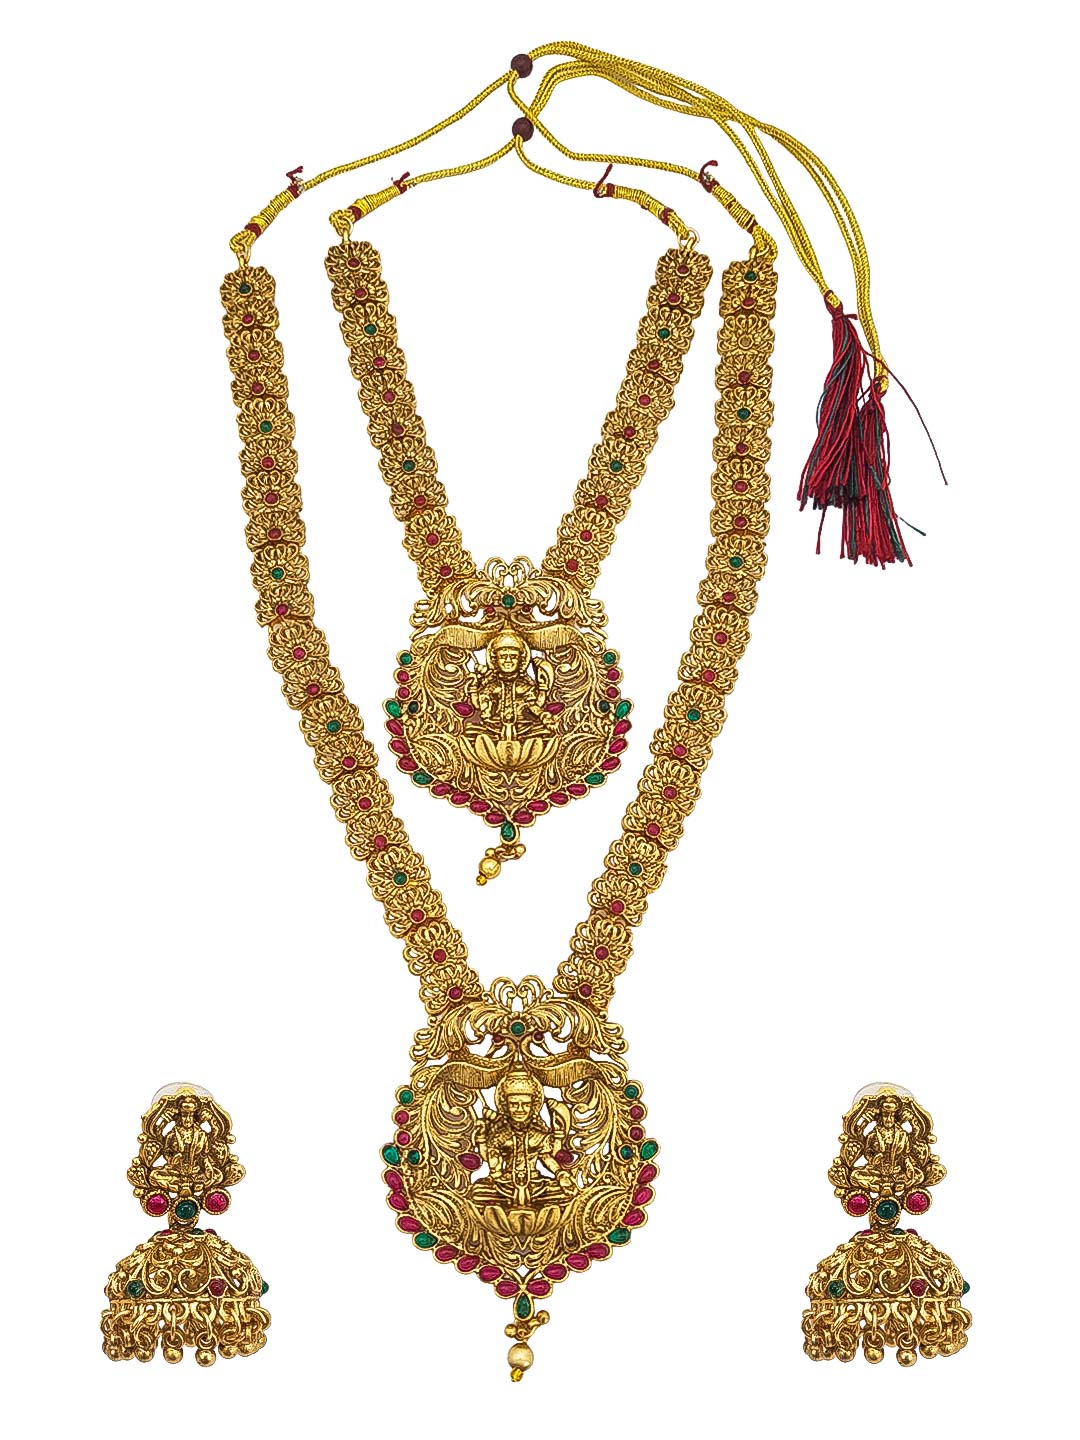 Premium gold finish Long Hara Necklace Set with CZ Stones 17370N